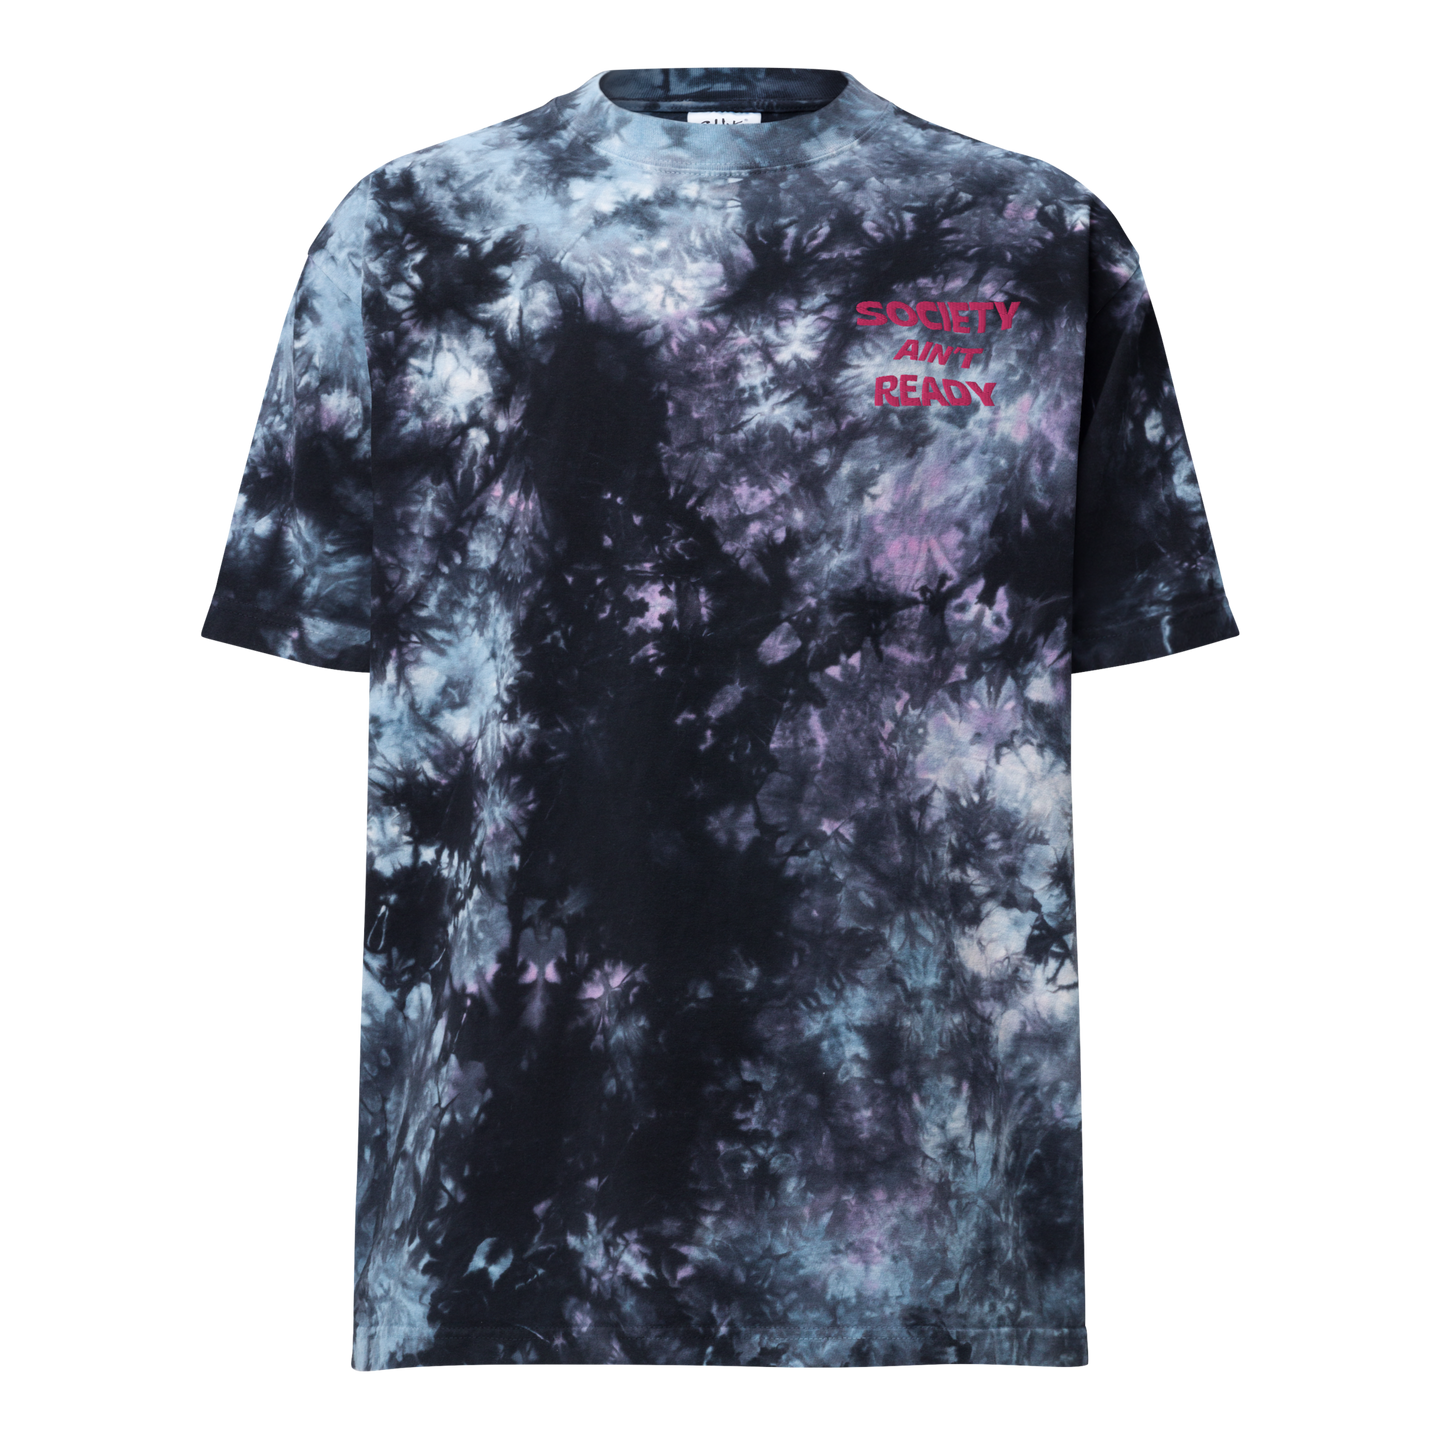 Society Ain't Ready Oversized Embroiderd Tie-Dye T-Shirt